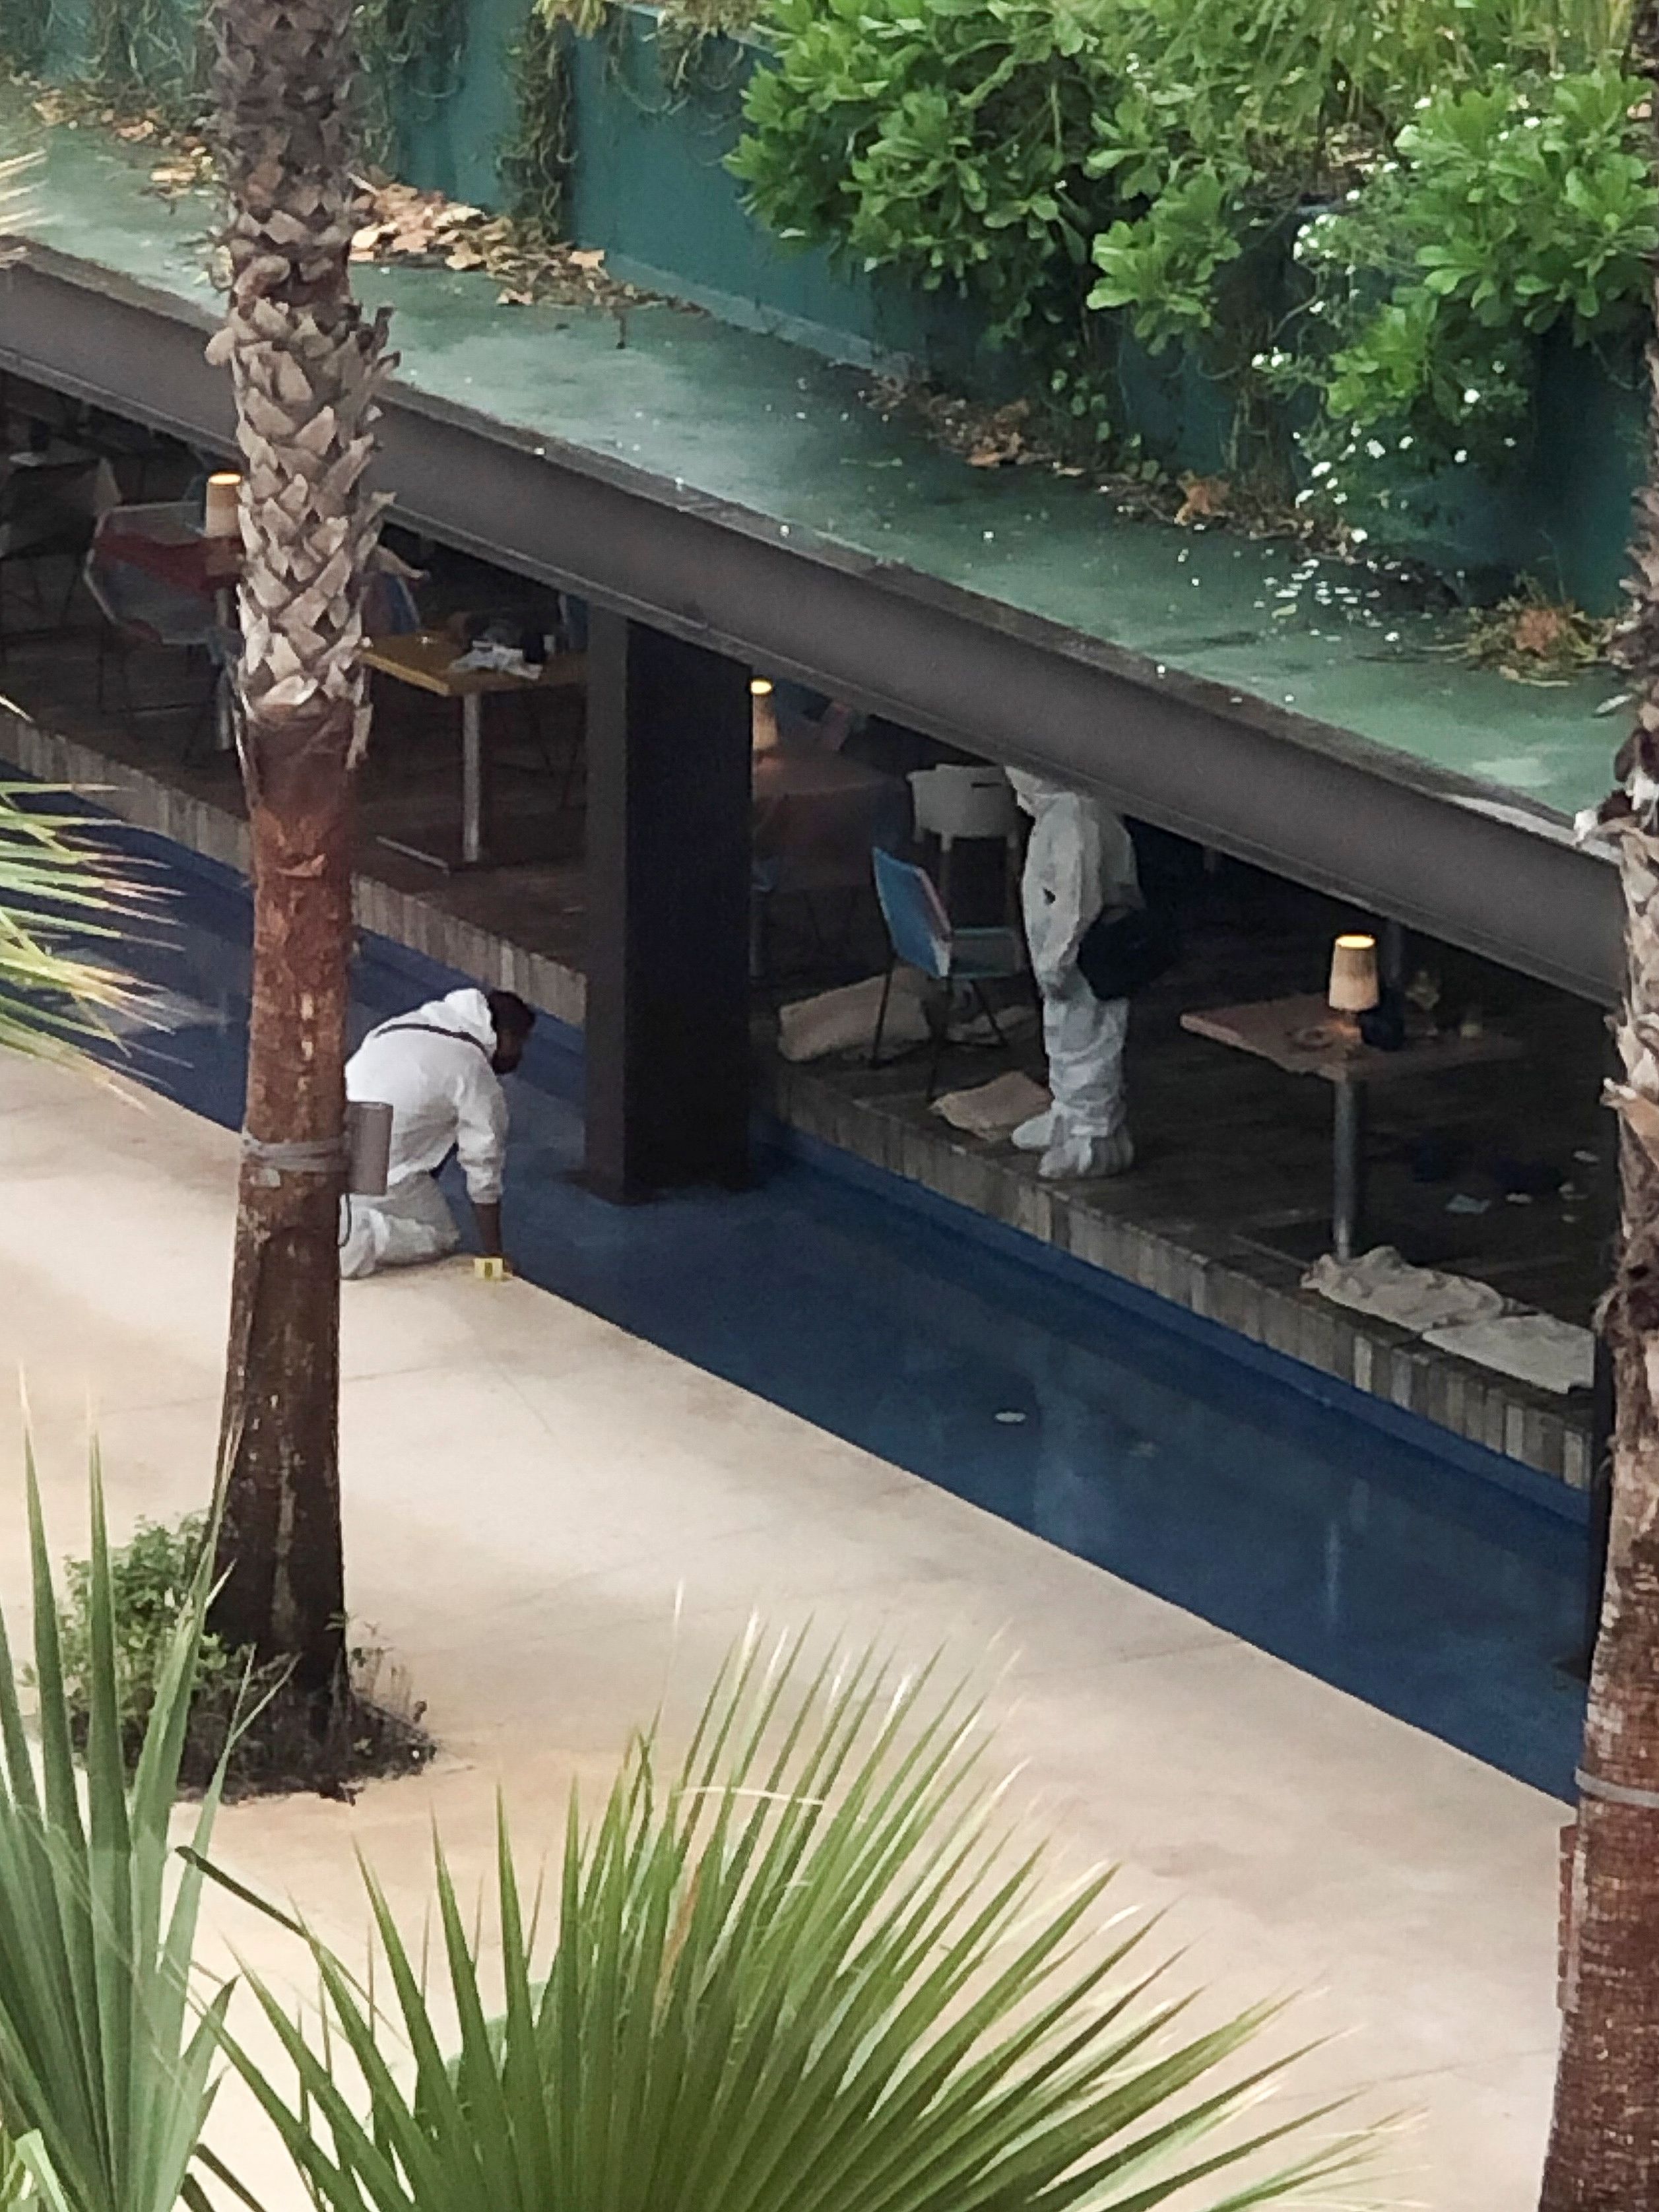 Forensic technicians work at a scene where three Canadian citizens were injured by gunshots at Hotel Xcaret, in Playa del Carmen, Mexico January 21, 2022. REUTERS/Stringer NO RESALES. NO ARCHIVES